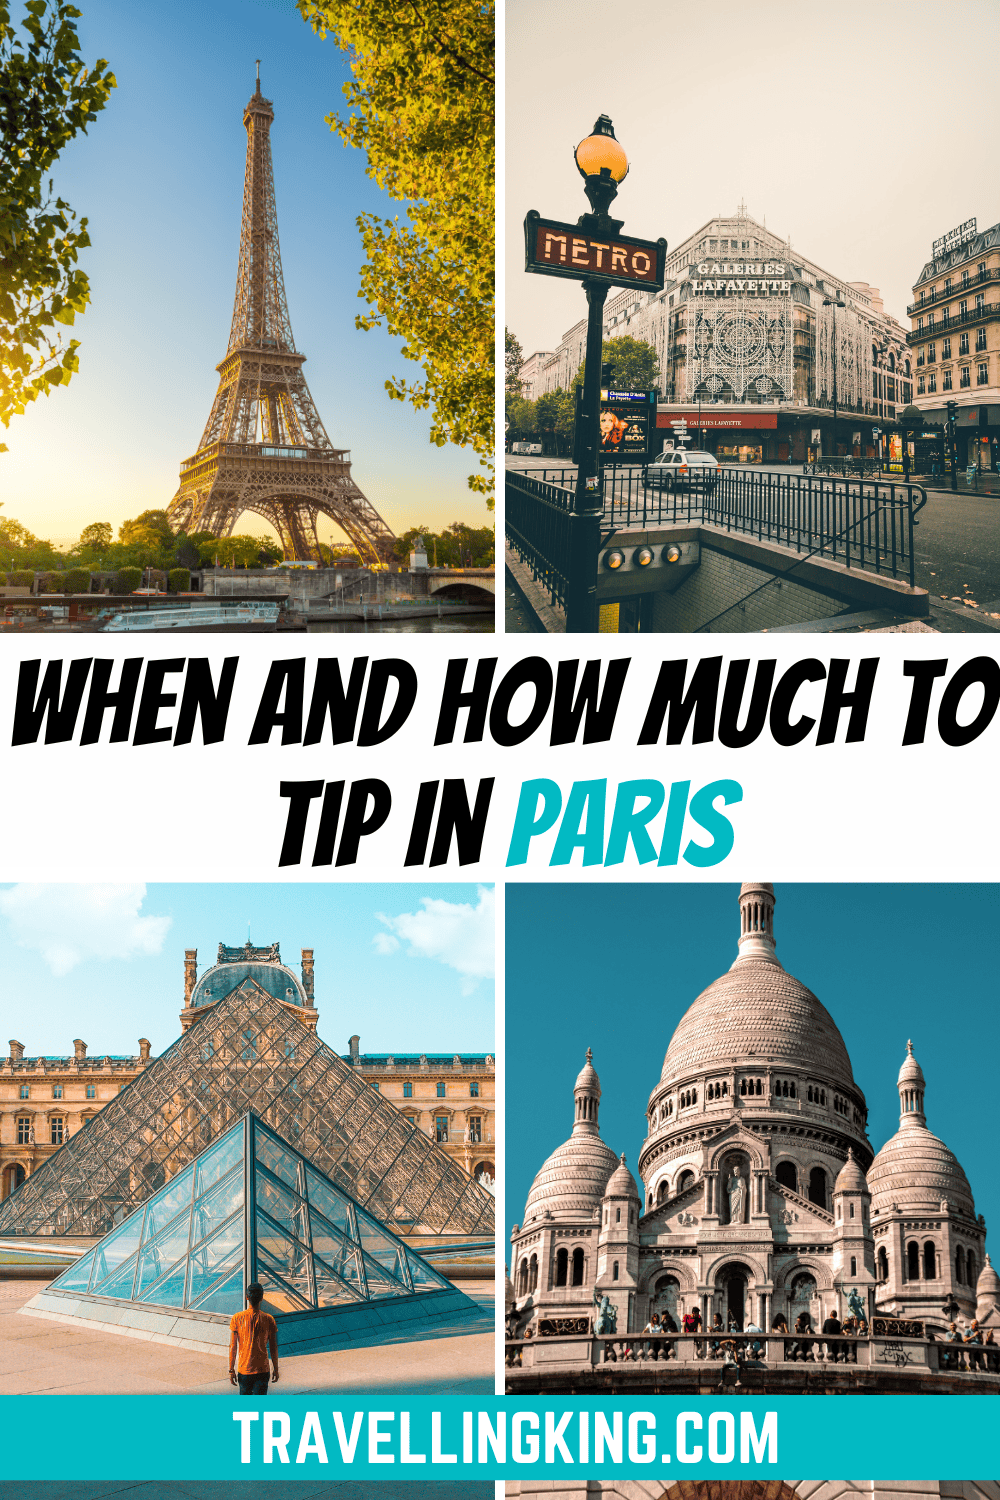 Tipping In Paris Guide | When And How Much To Tip In Paris